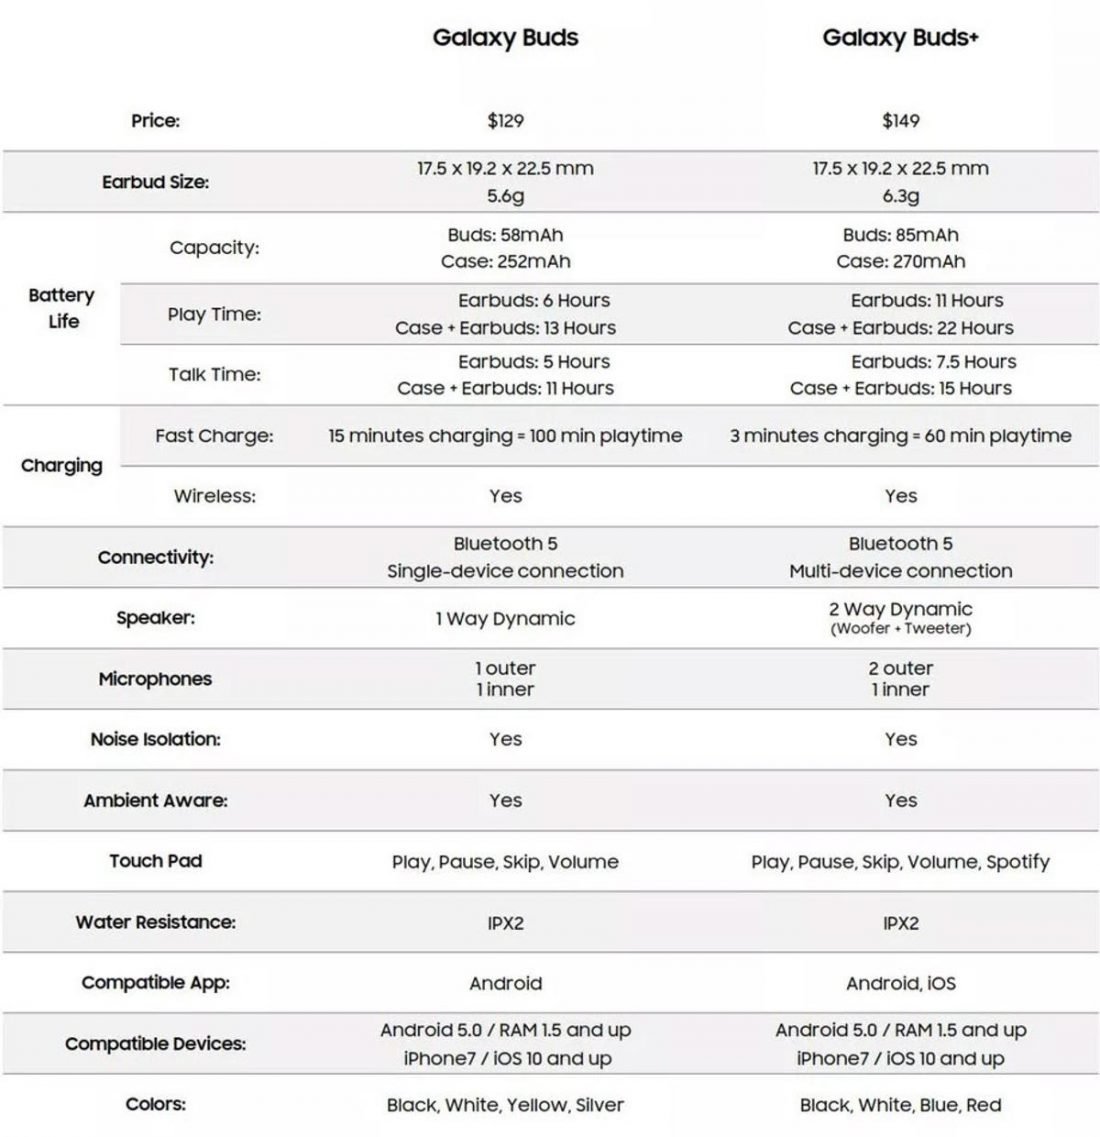 This is the complete specifications chart for the Galaxy Buds and Galaxy Buds+ (From: Max Weinbach, Twitter)